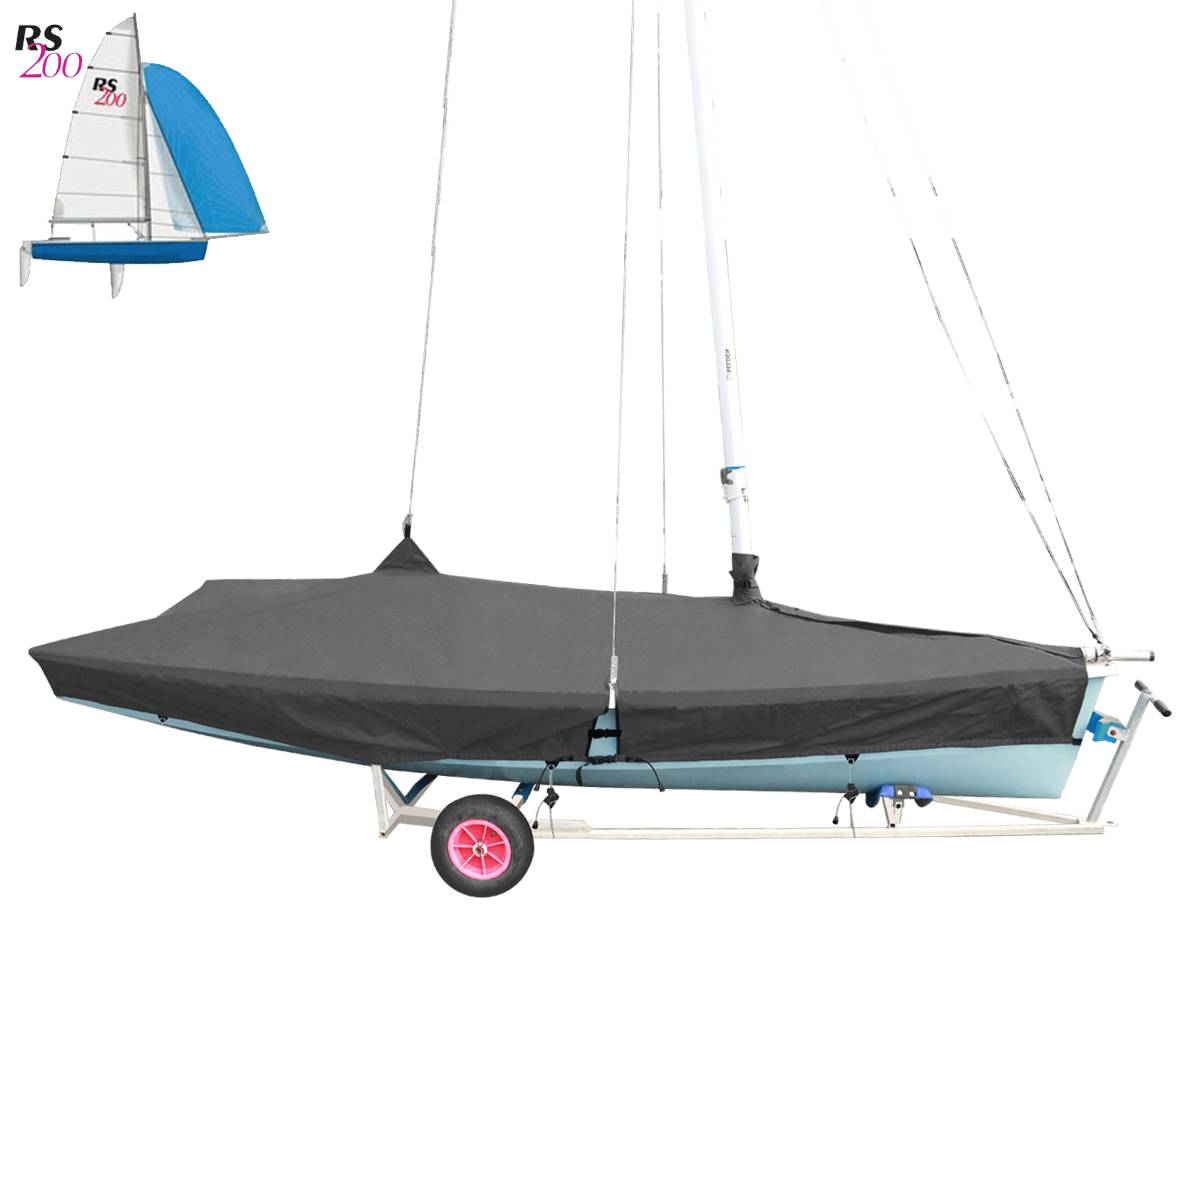 RS200DeckWithMast